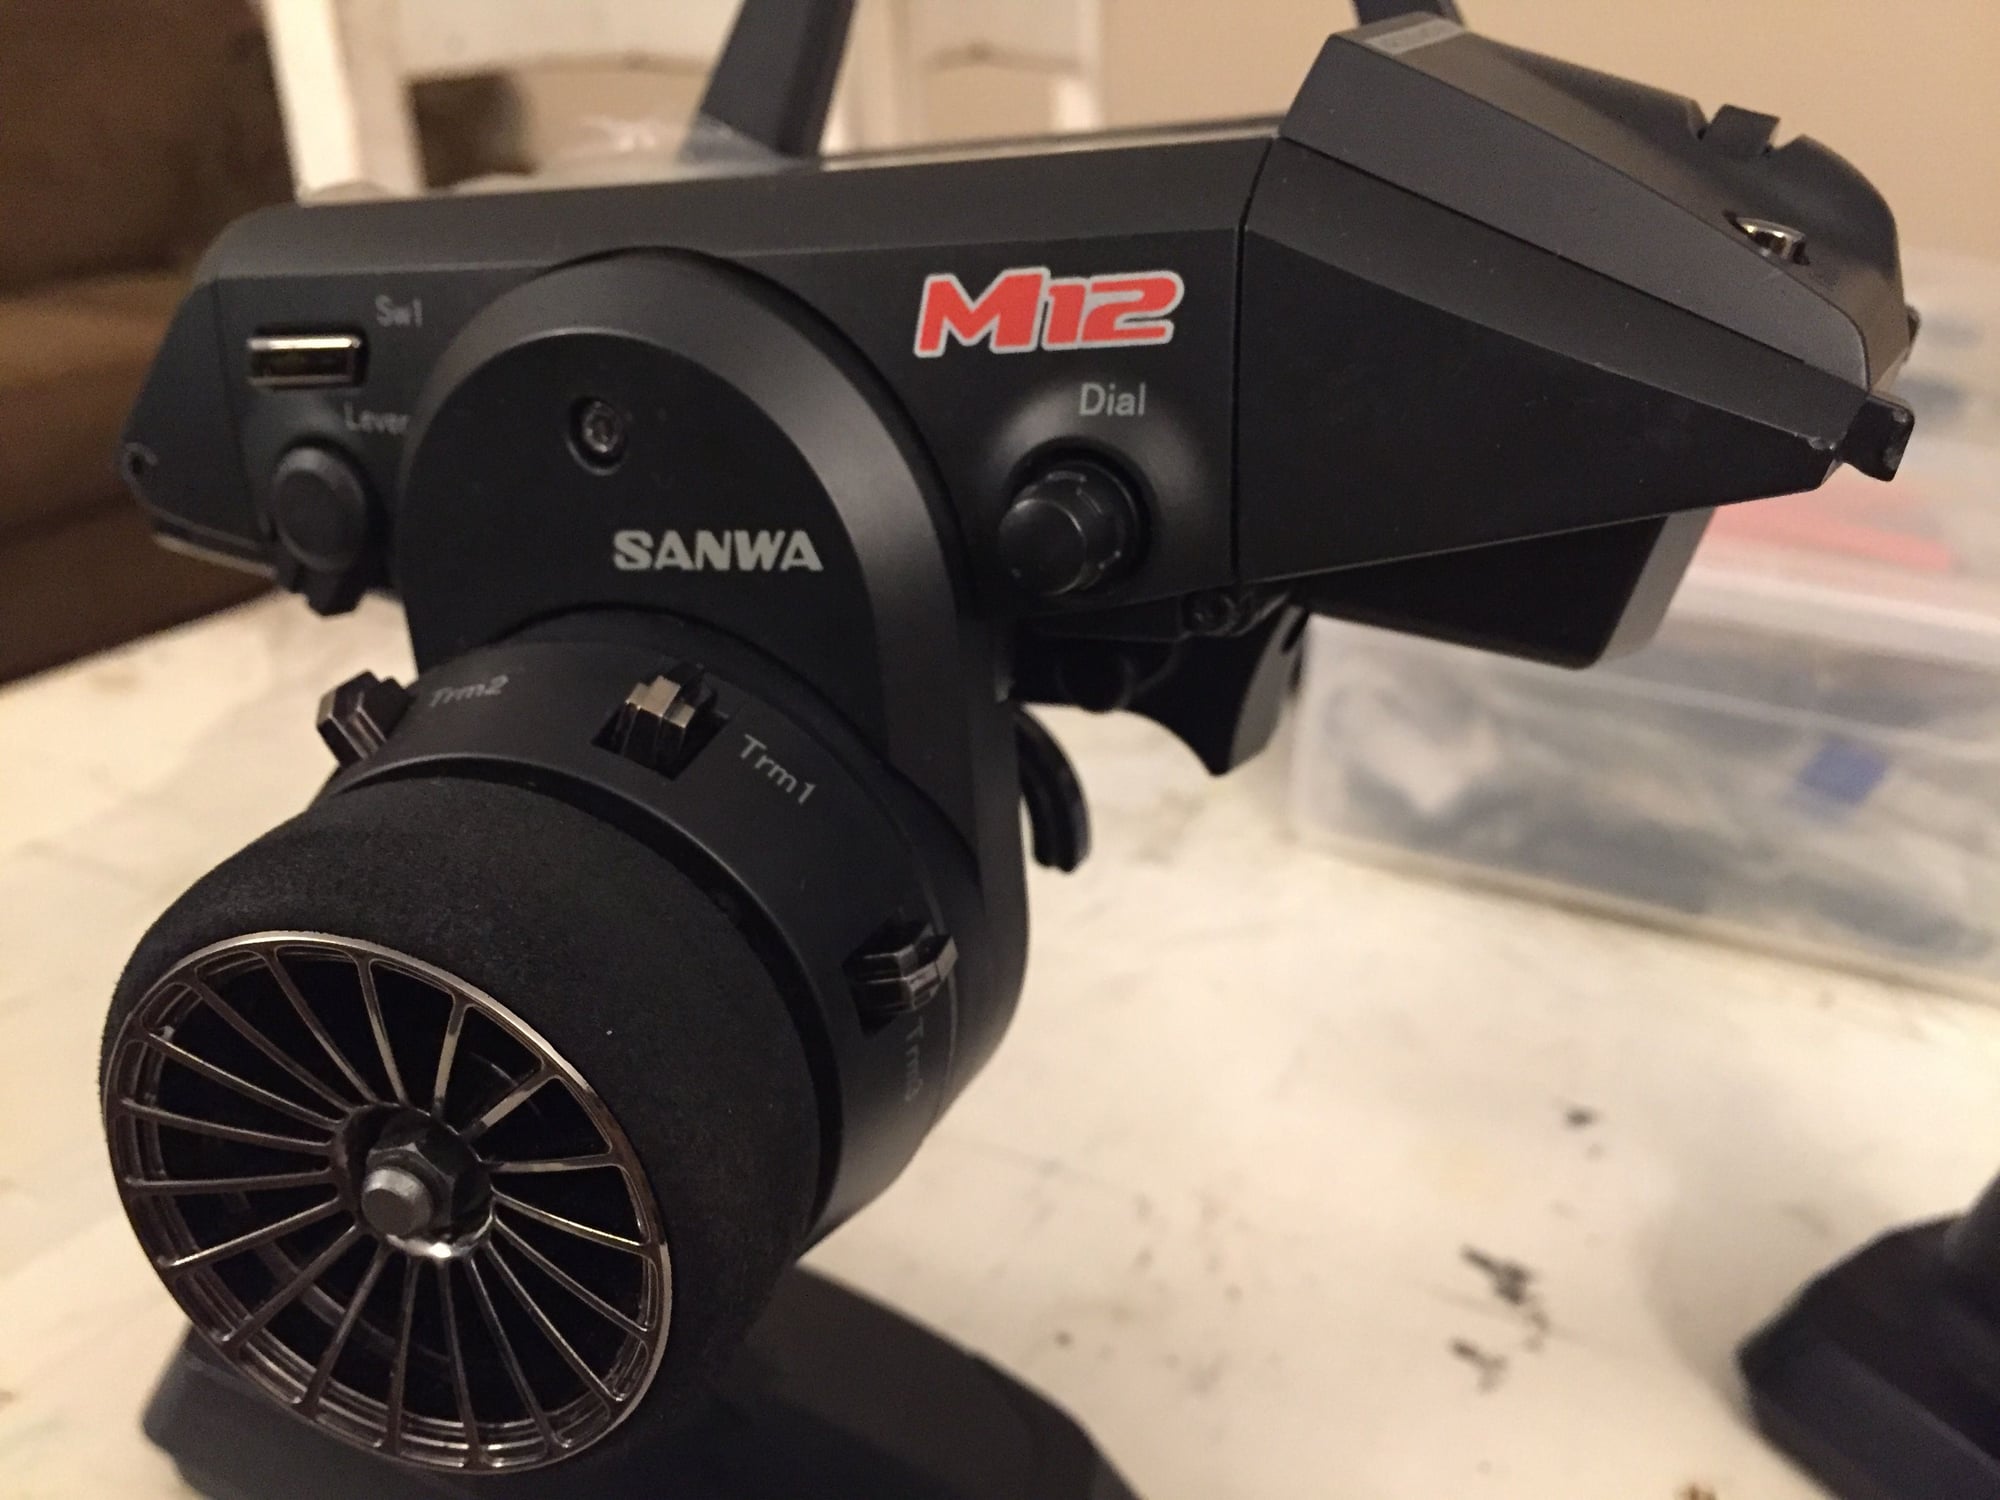 Sanwa M12s For Repair or Parts - R/C Tech Forums